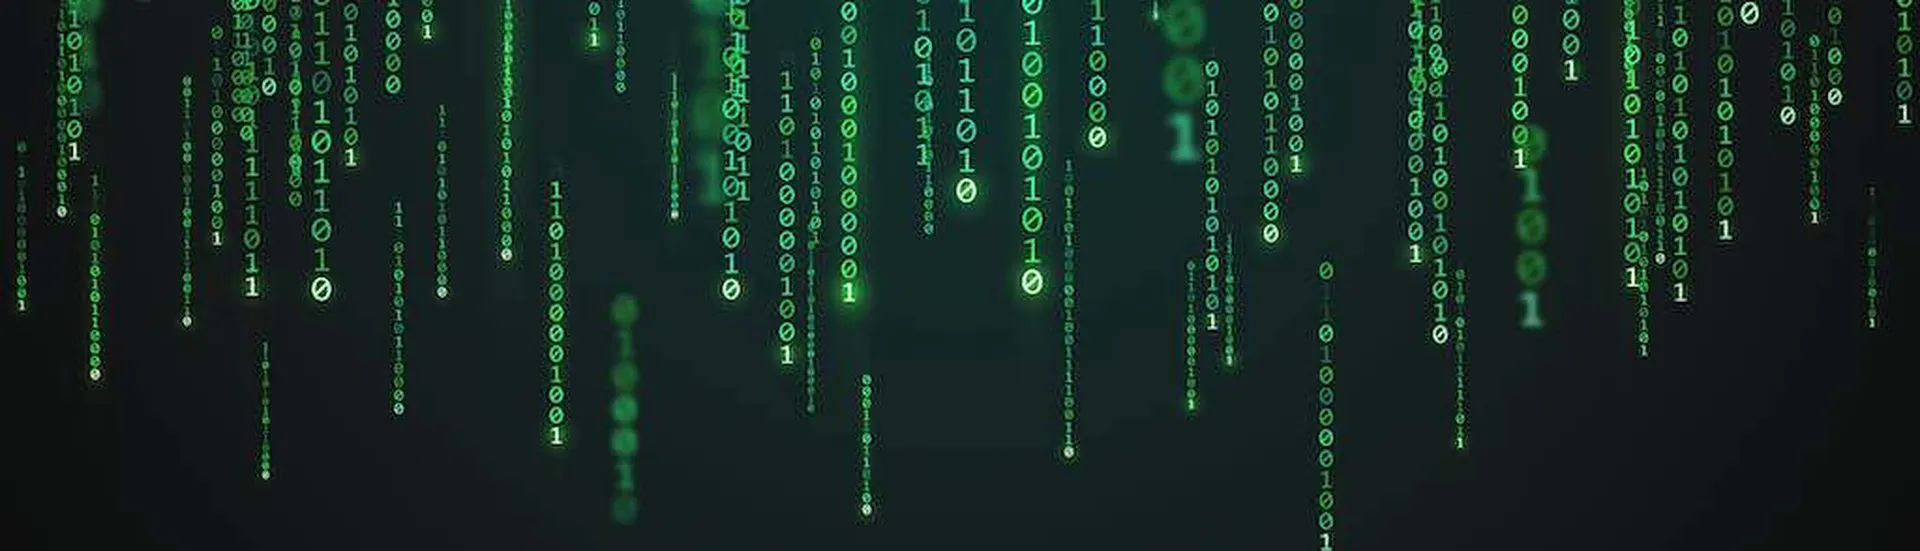 Matrix background. Binary code texture. Falling green numbers. Data visualization concept. Futuristic digital backdrop. One and zero digits. Computer screen template. Vector illustration.